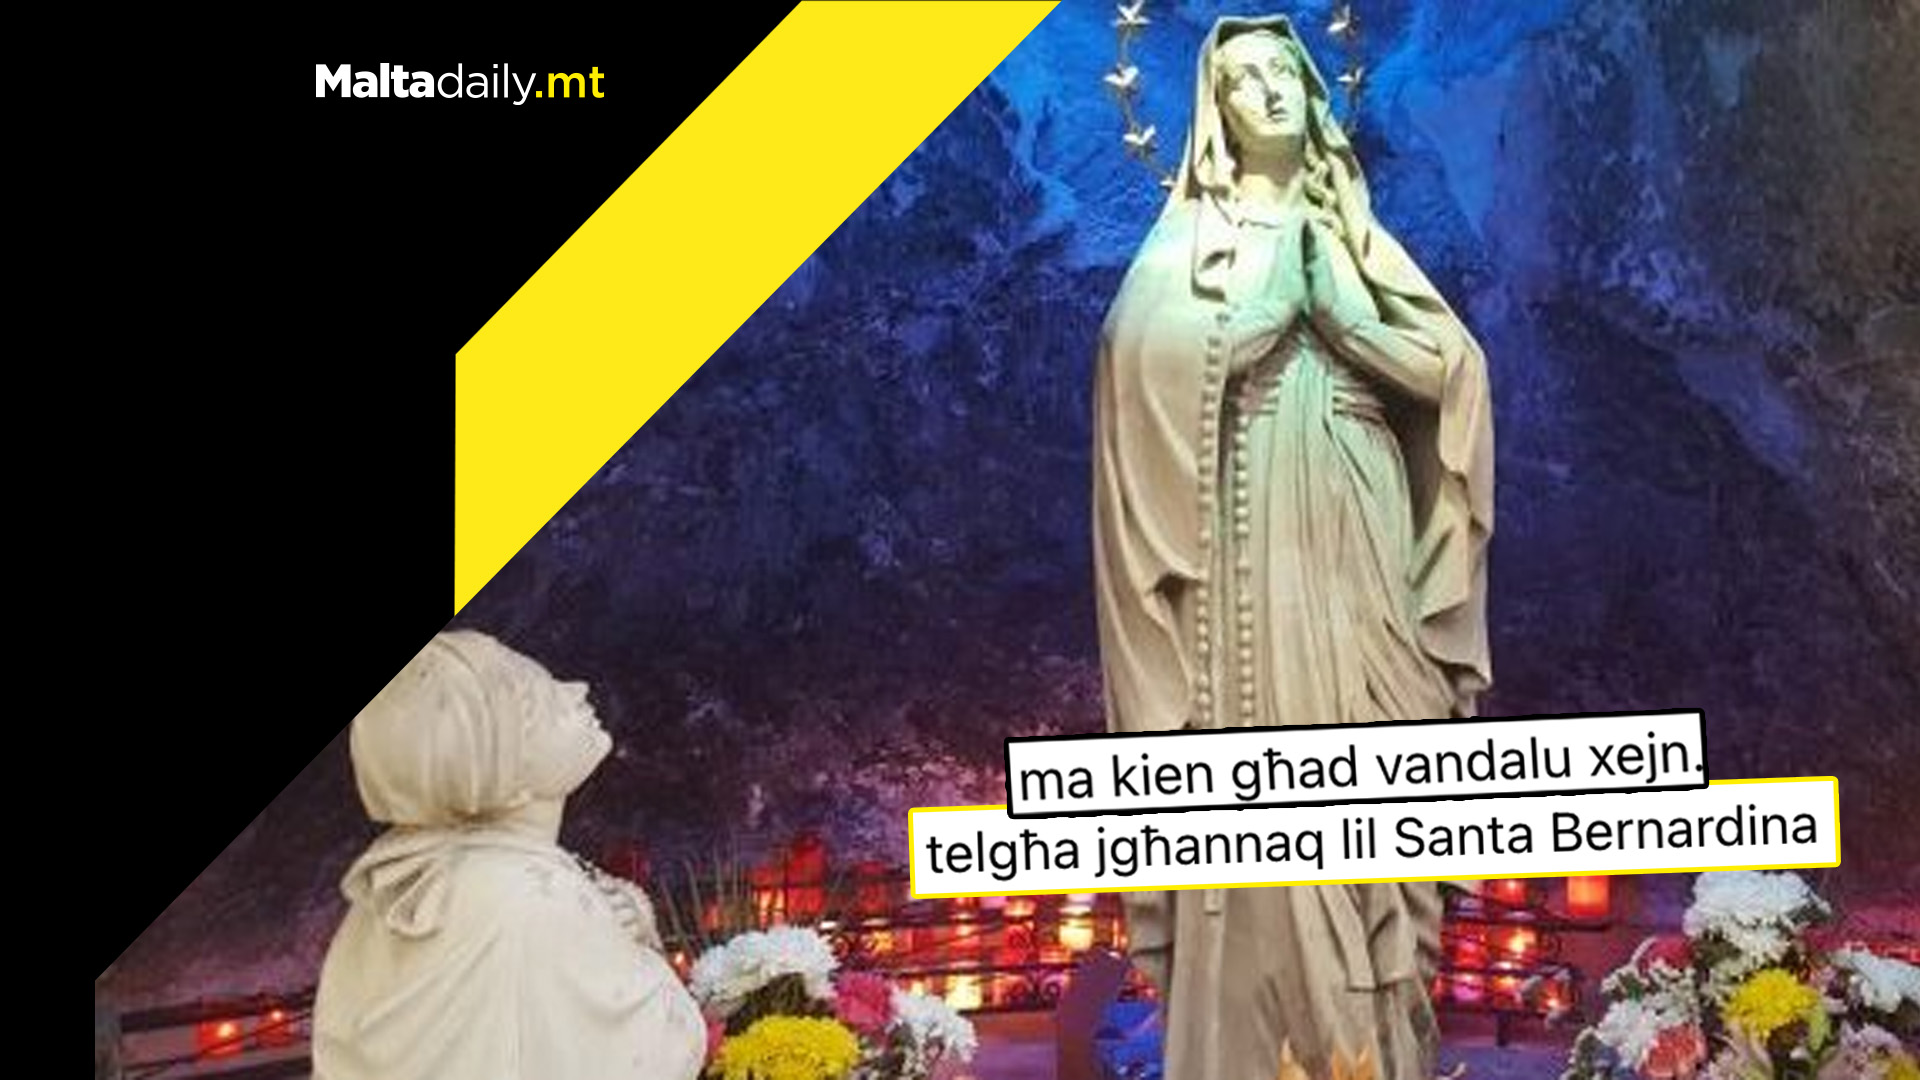 'Vandalism' on Marsa statue was actually religious man who went in for a hug